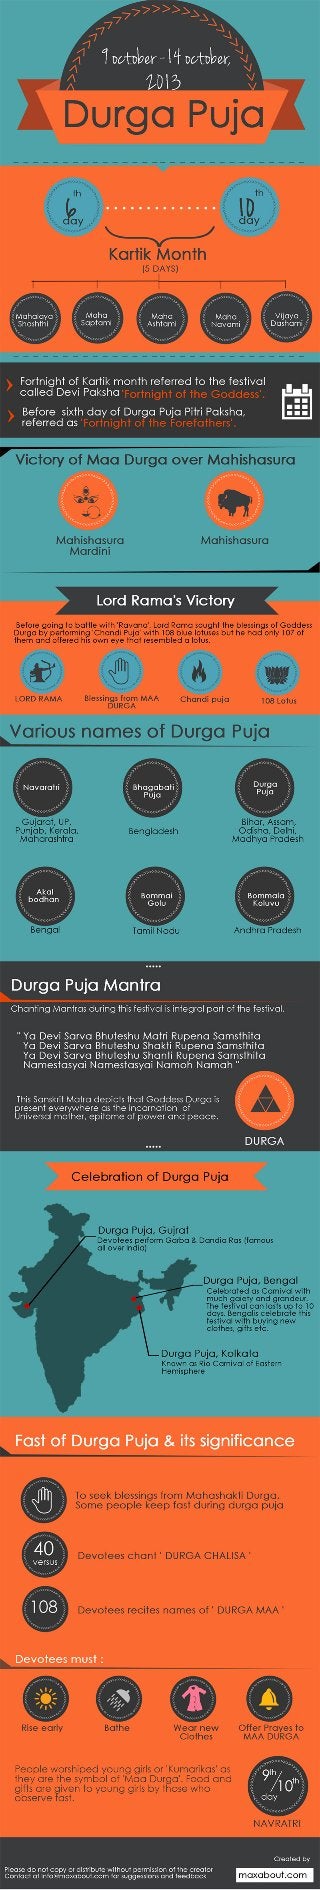 Interesting Facts About Durga Puja